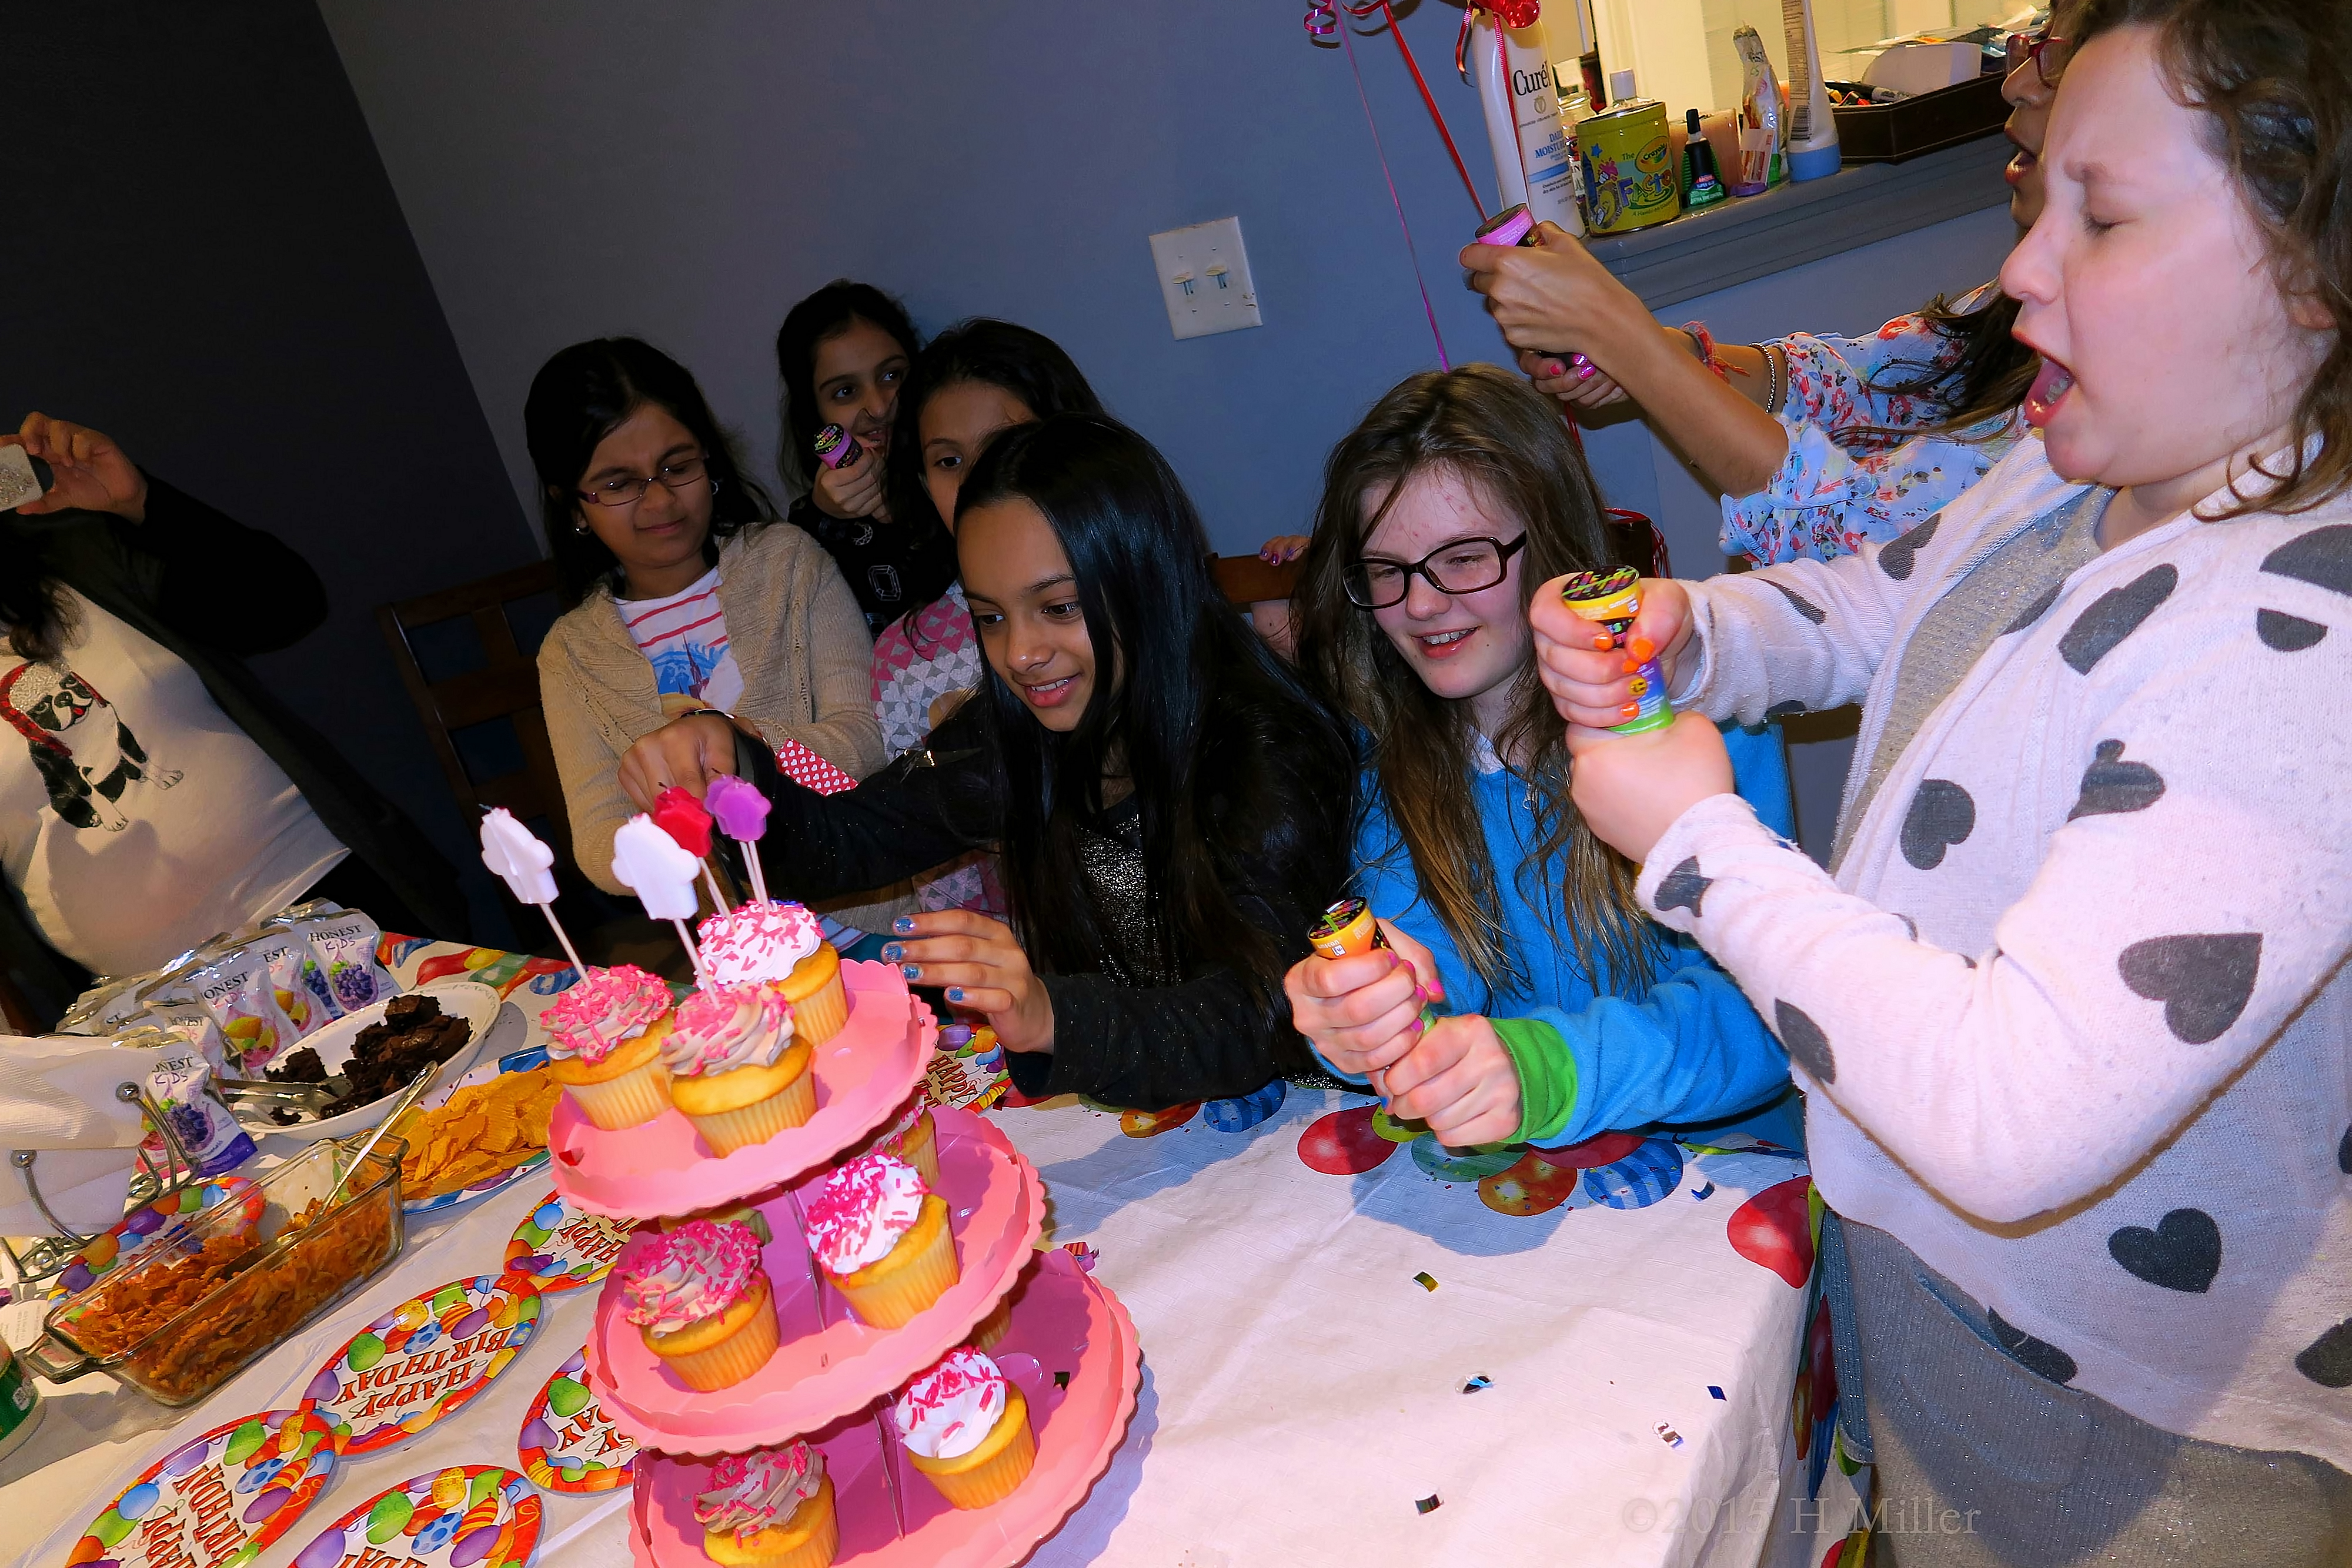 The Girls Getting Their Cupcakes 4